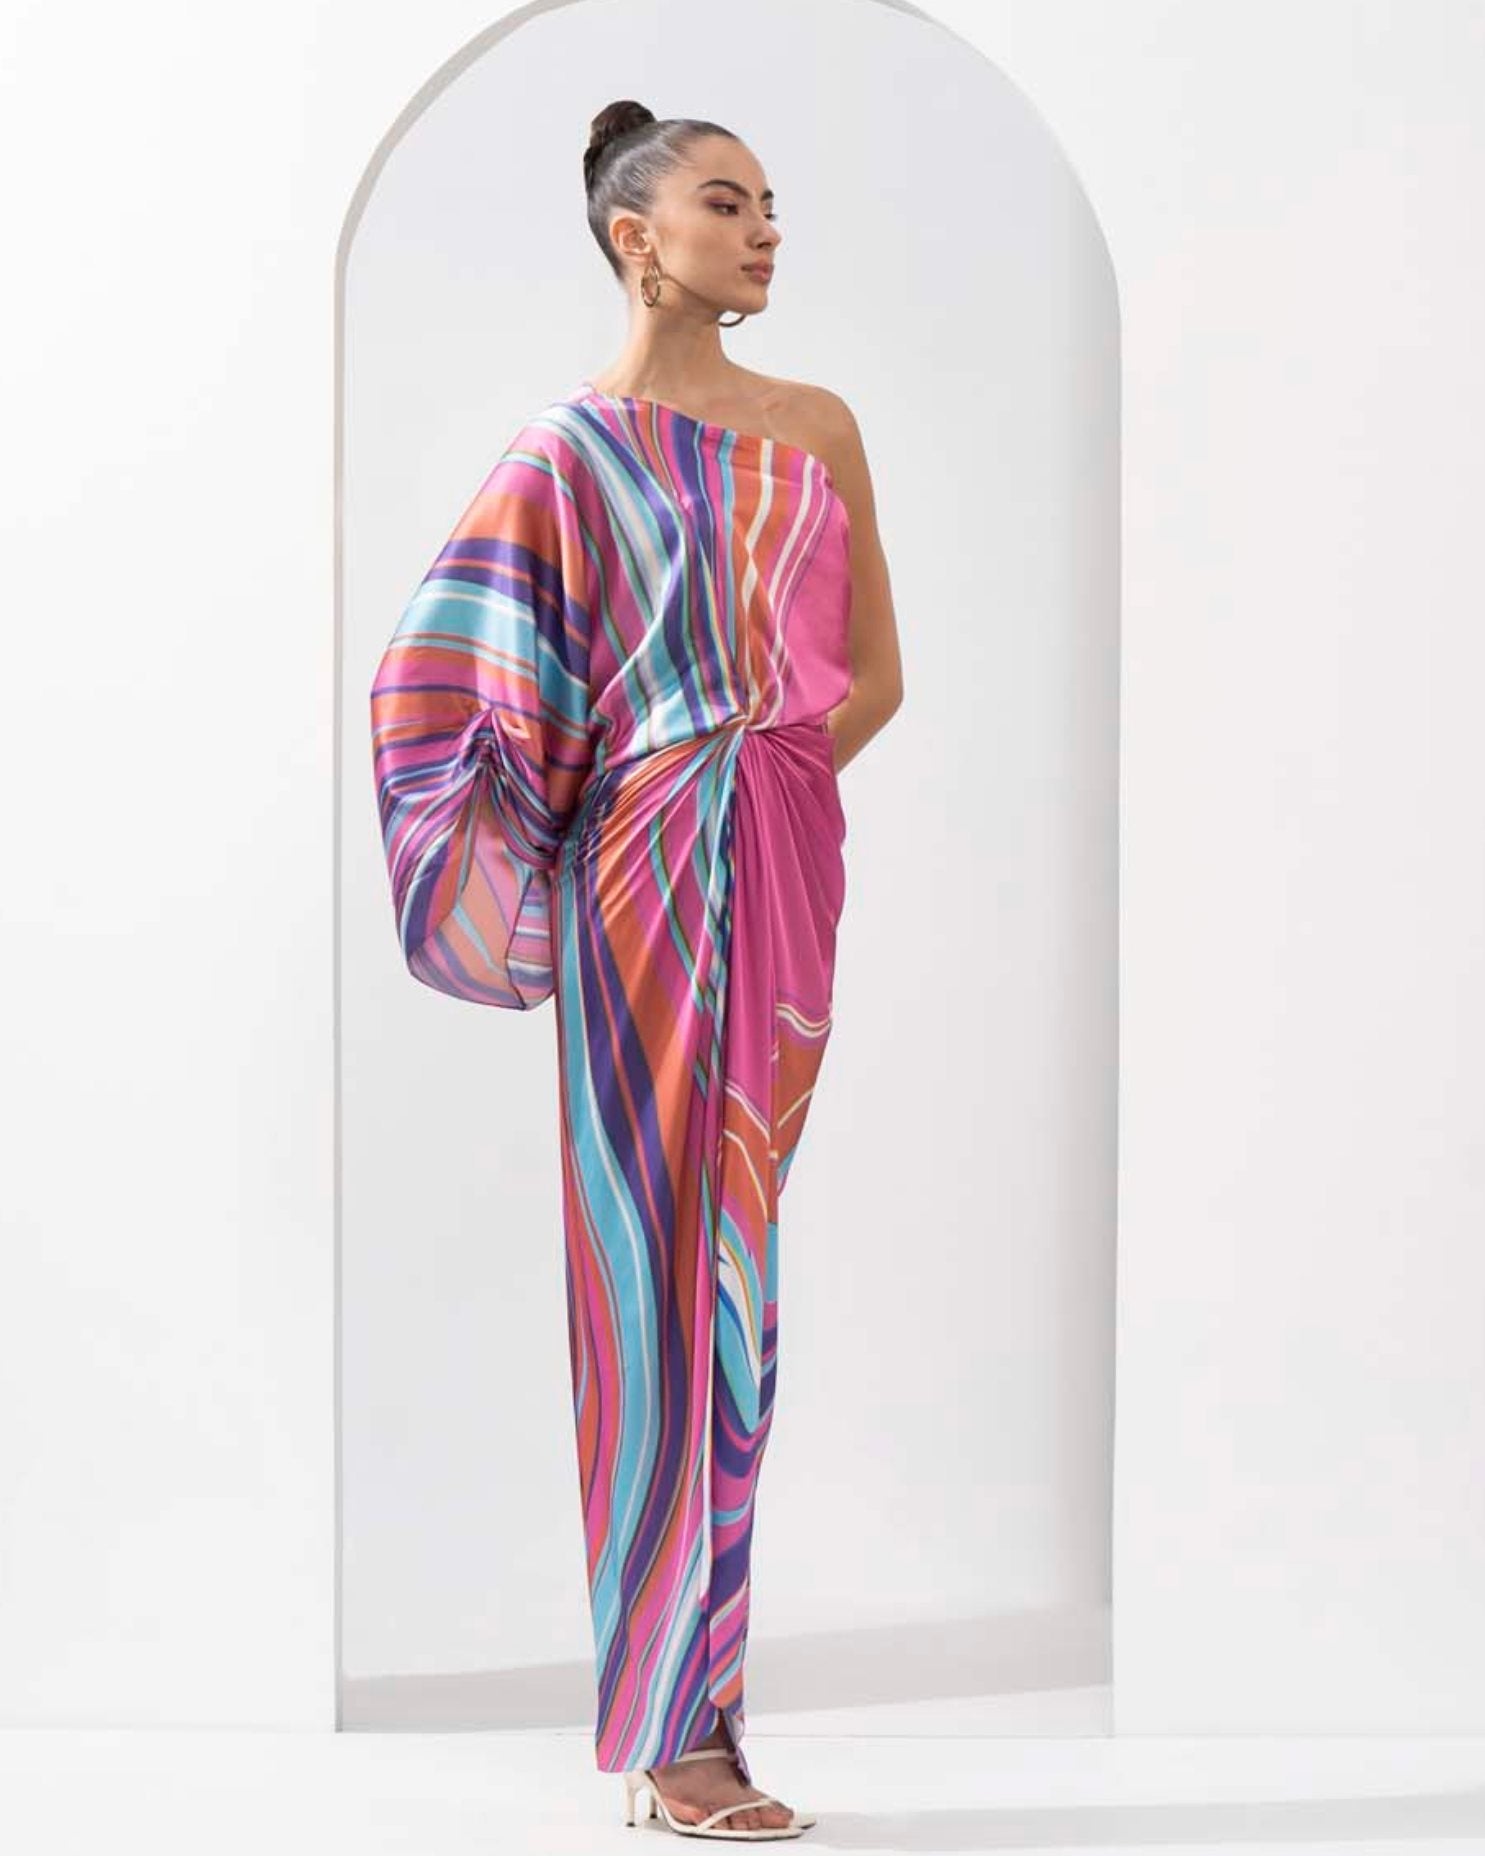 Pink marble placement printed draped dress made with lustrous satin.